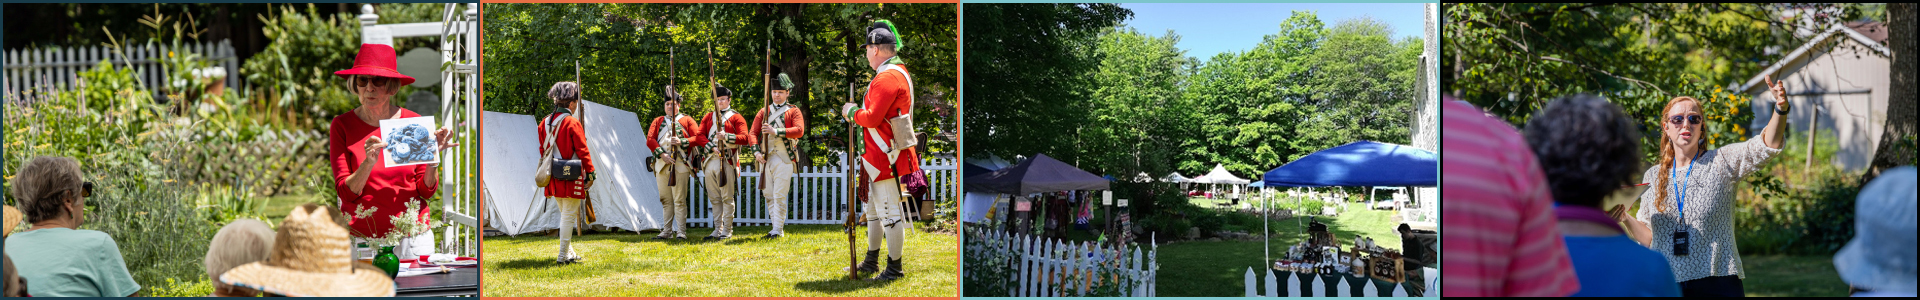 Saratoga County Historical Society at Brookside Museum - Events